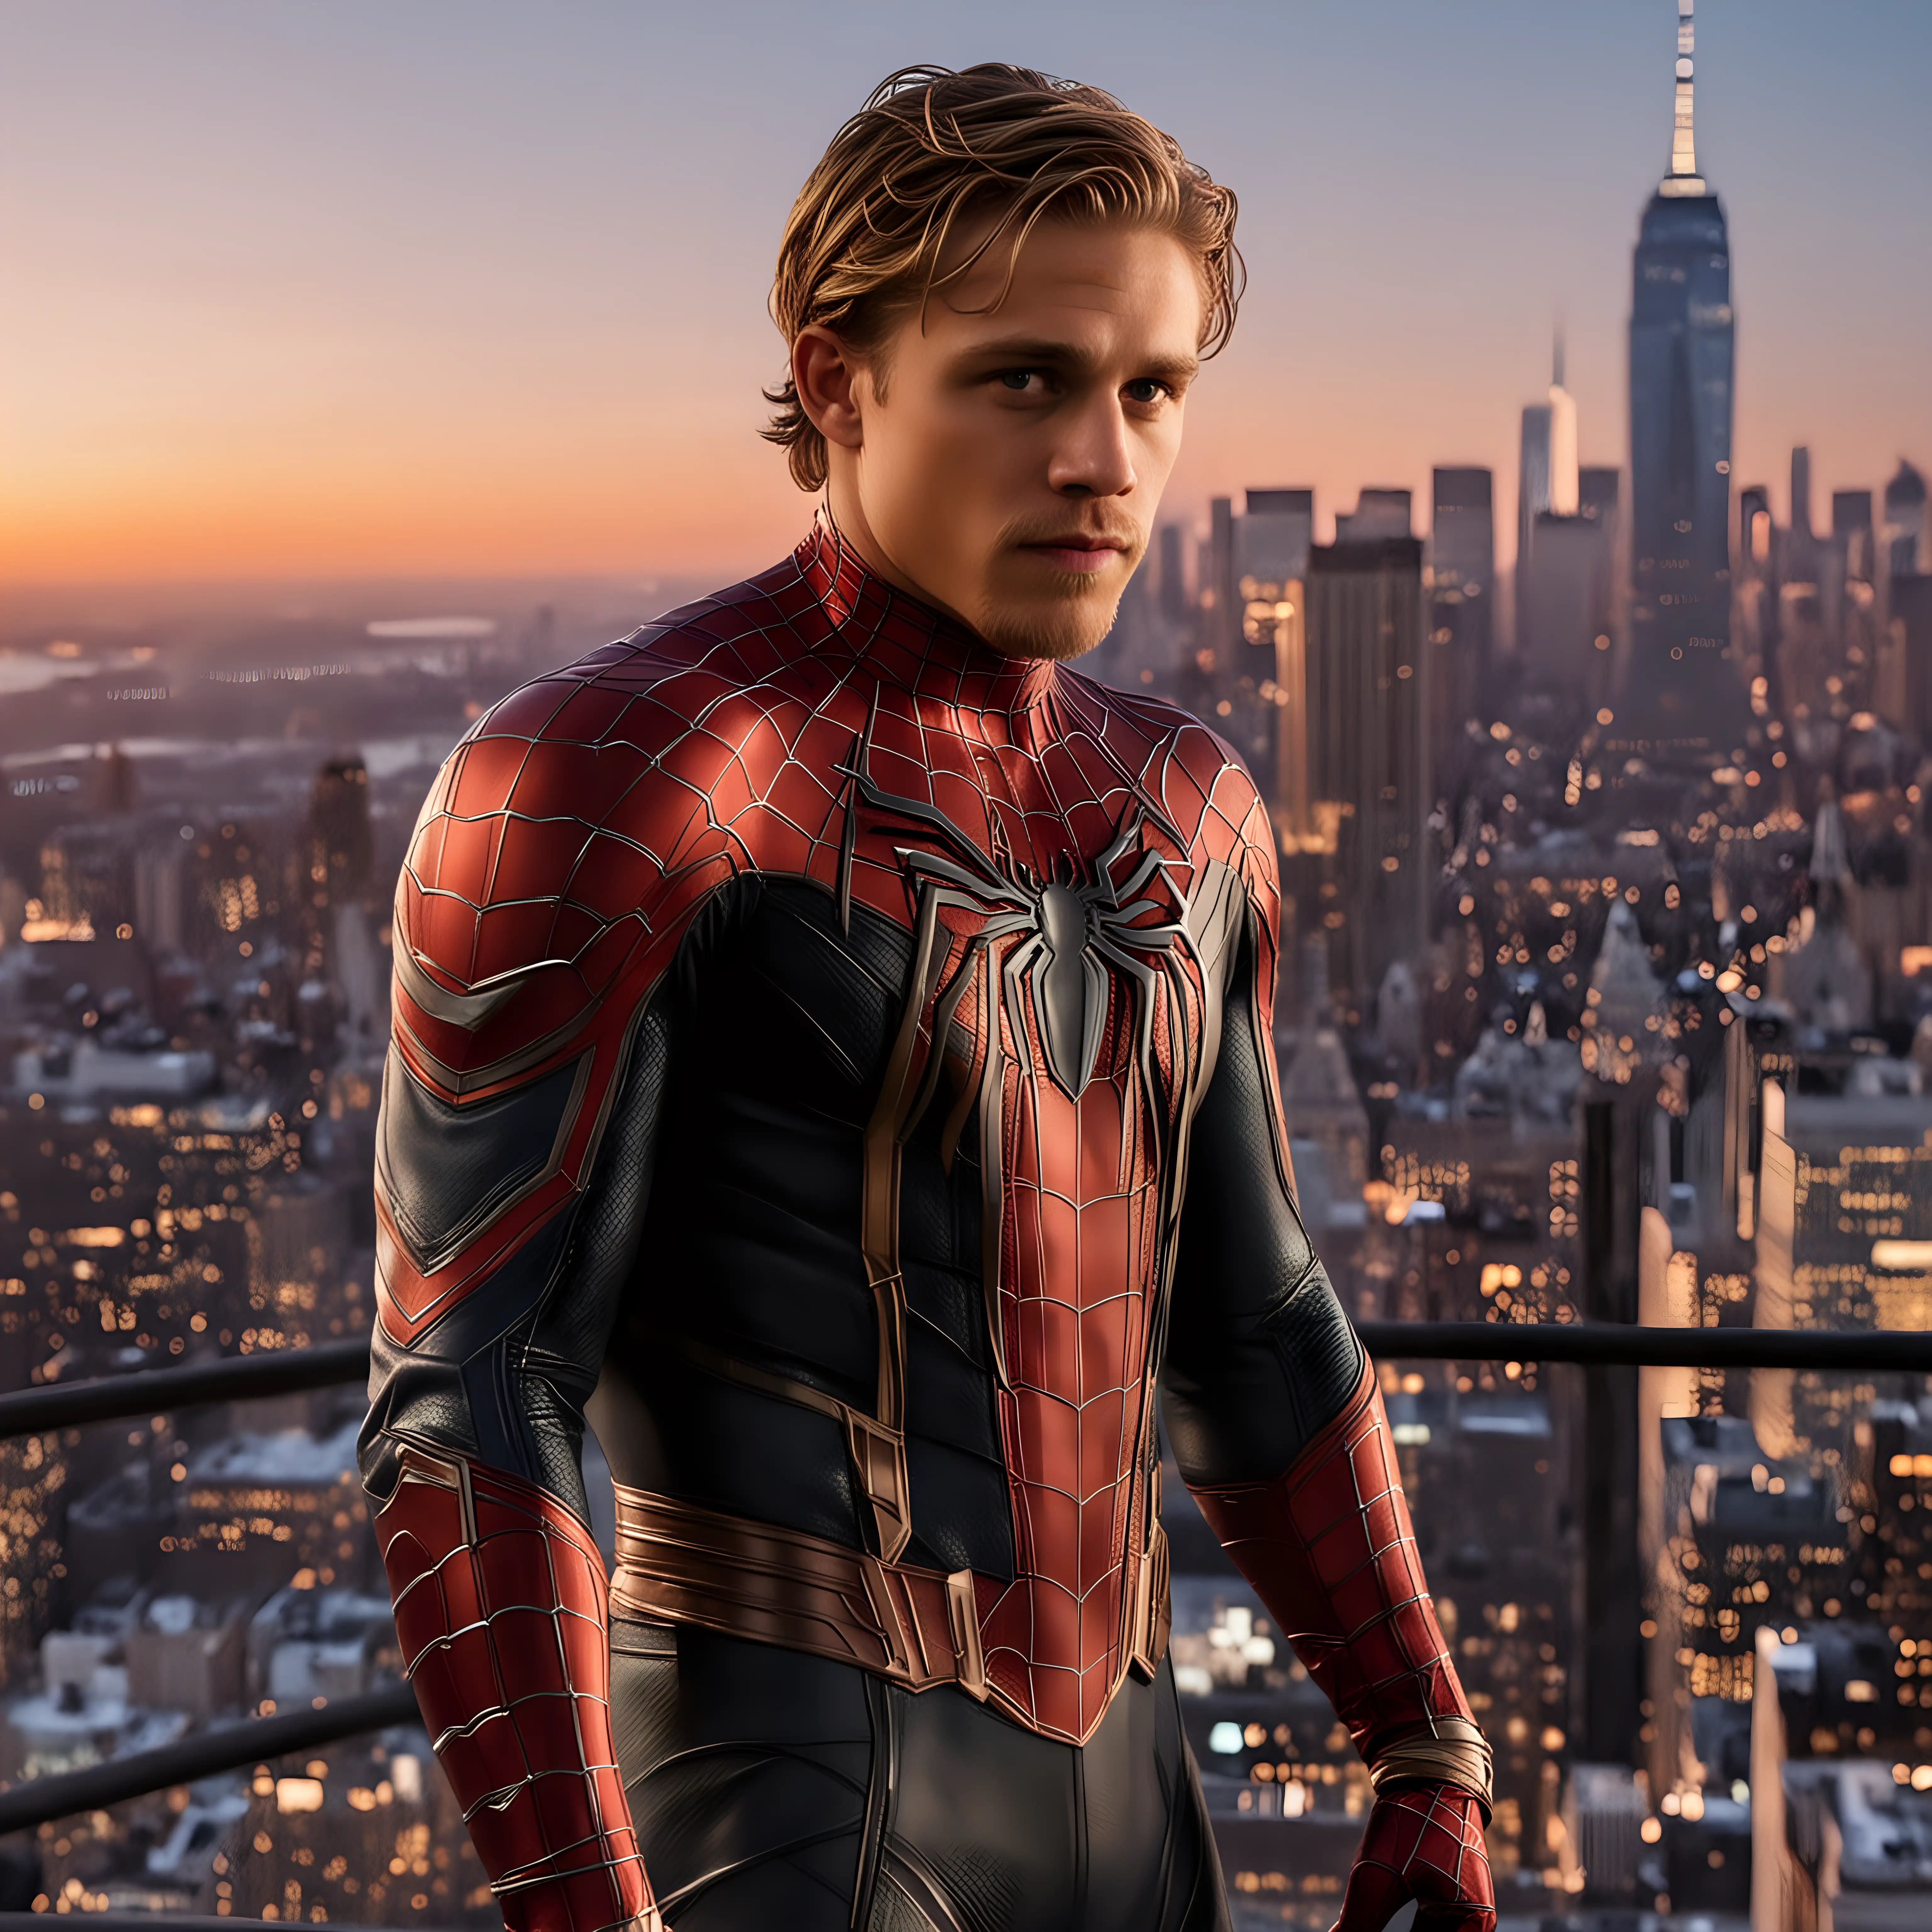 Charlie Hunnam in SpiderMan Costume with New York Skyline at Sunset